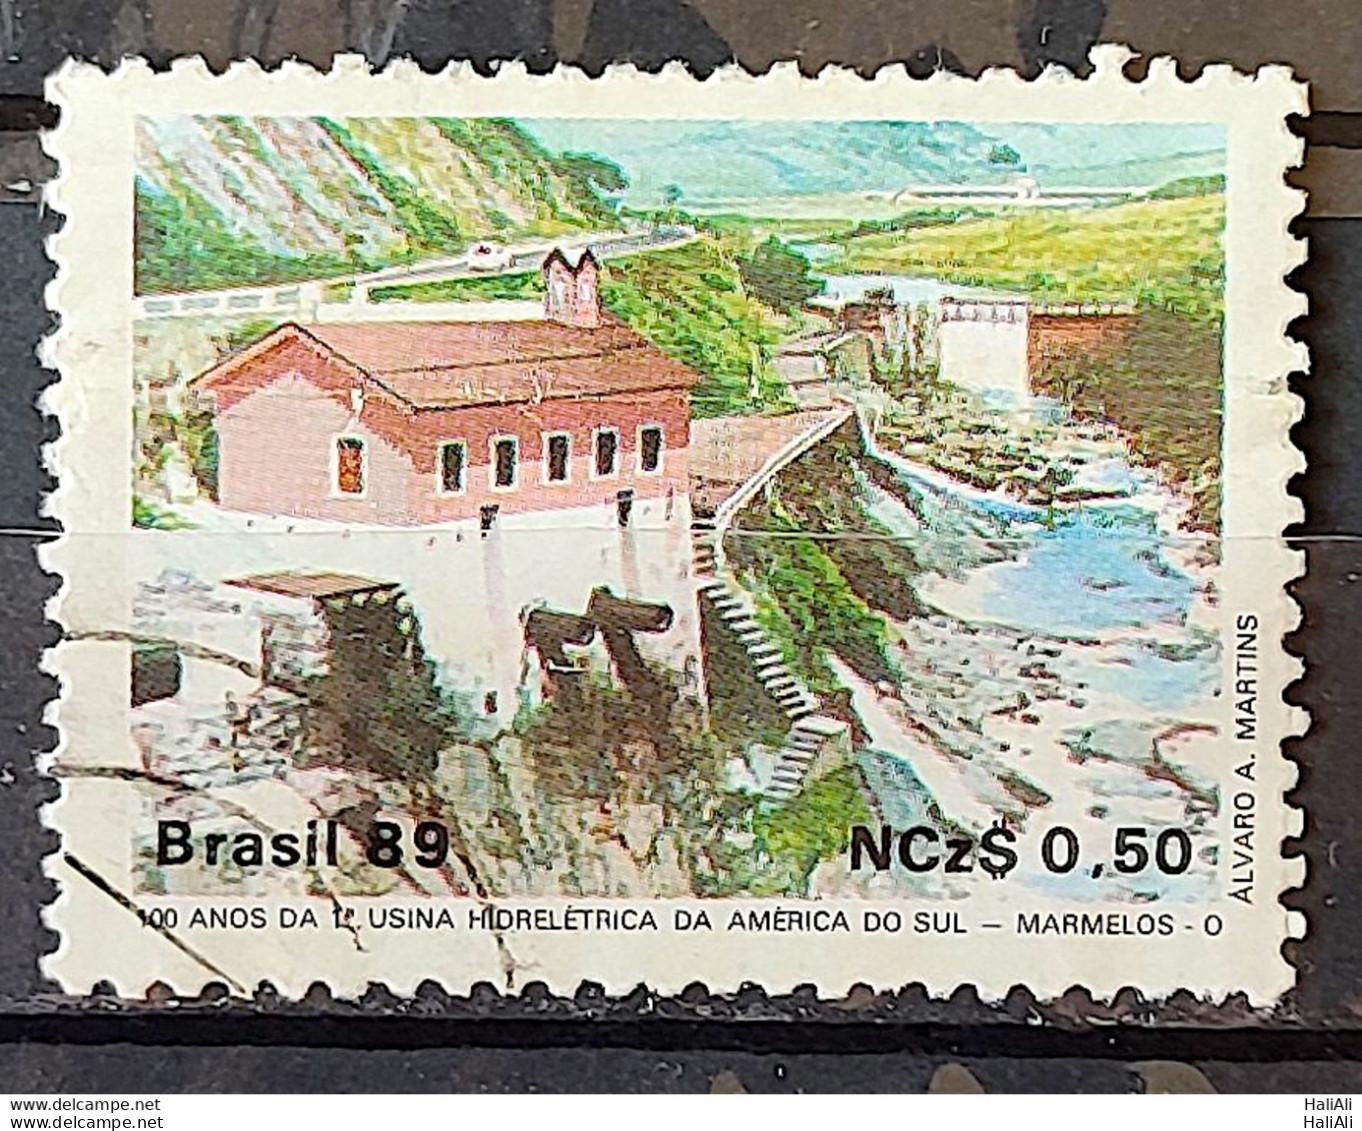 C 1644 Brazil Stamp 100 Years Hydroelectric Marmelos Energy Electricity Juiz De Fora 1989 Circulated 24 - Used Stamps